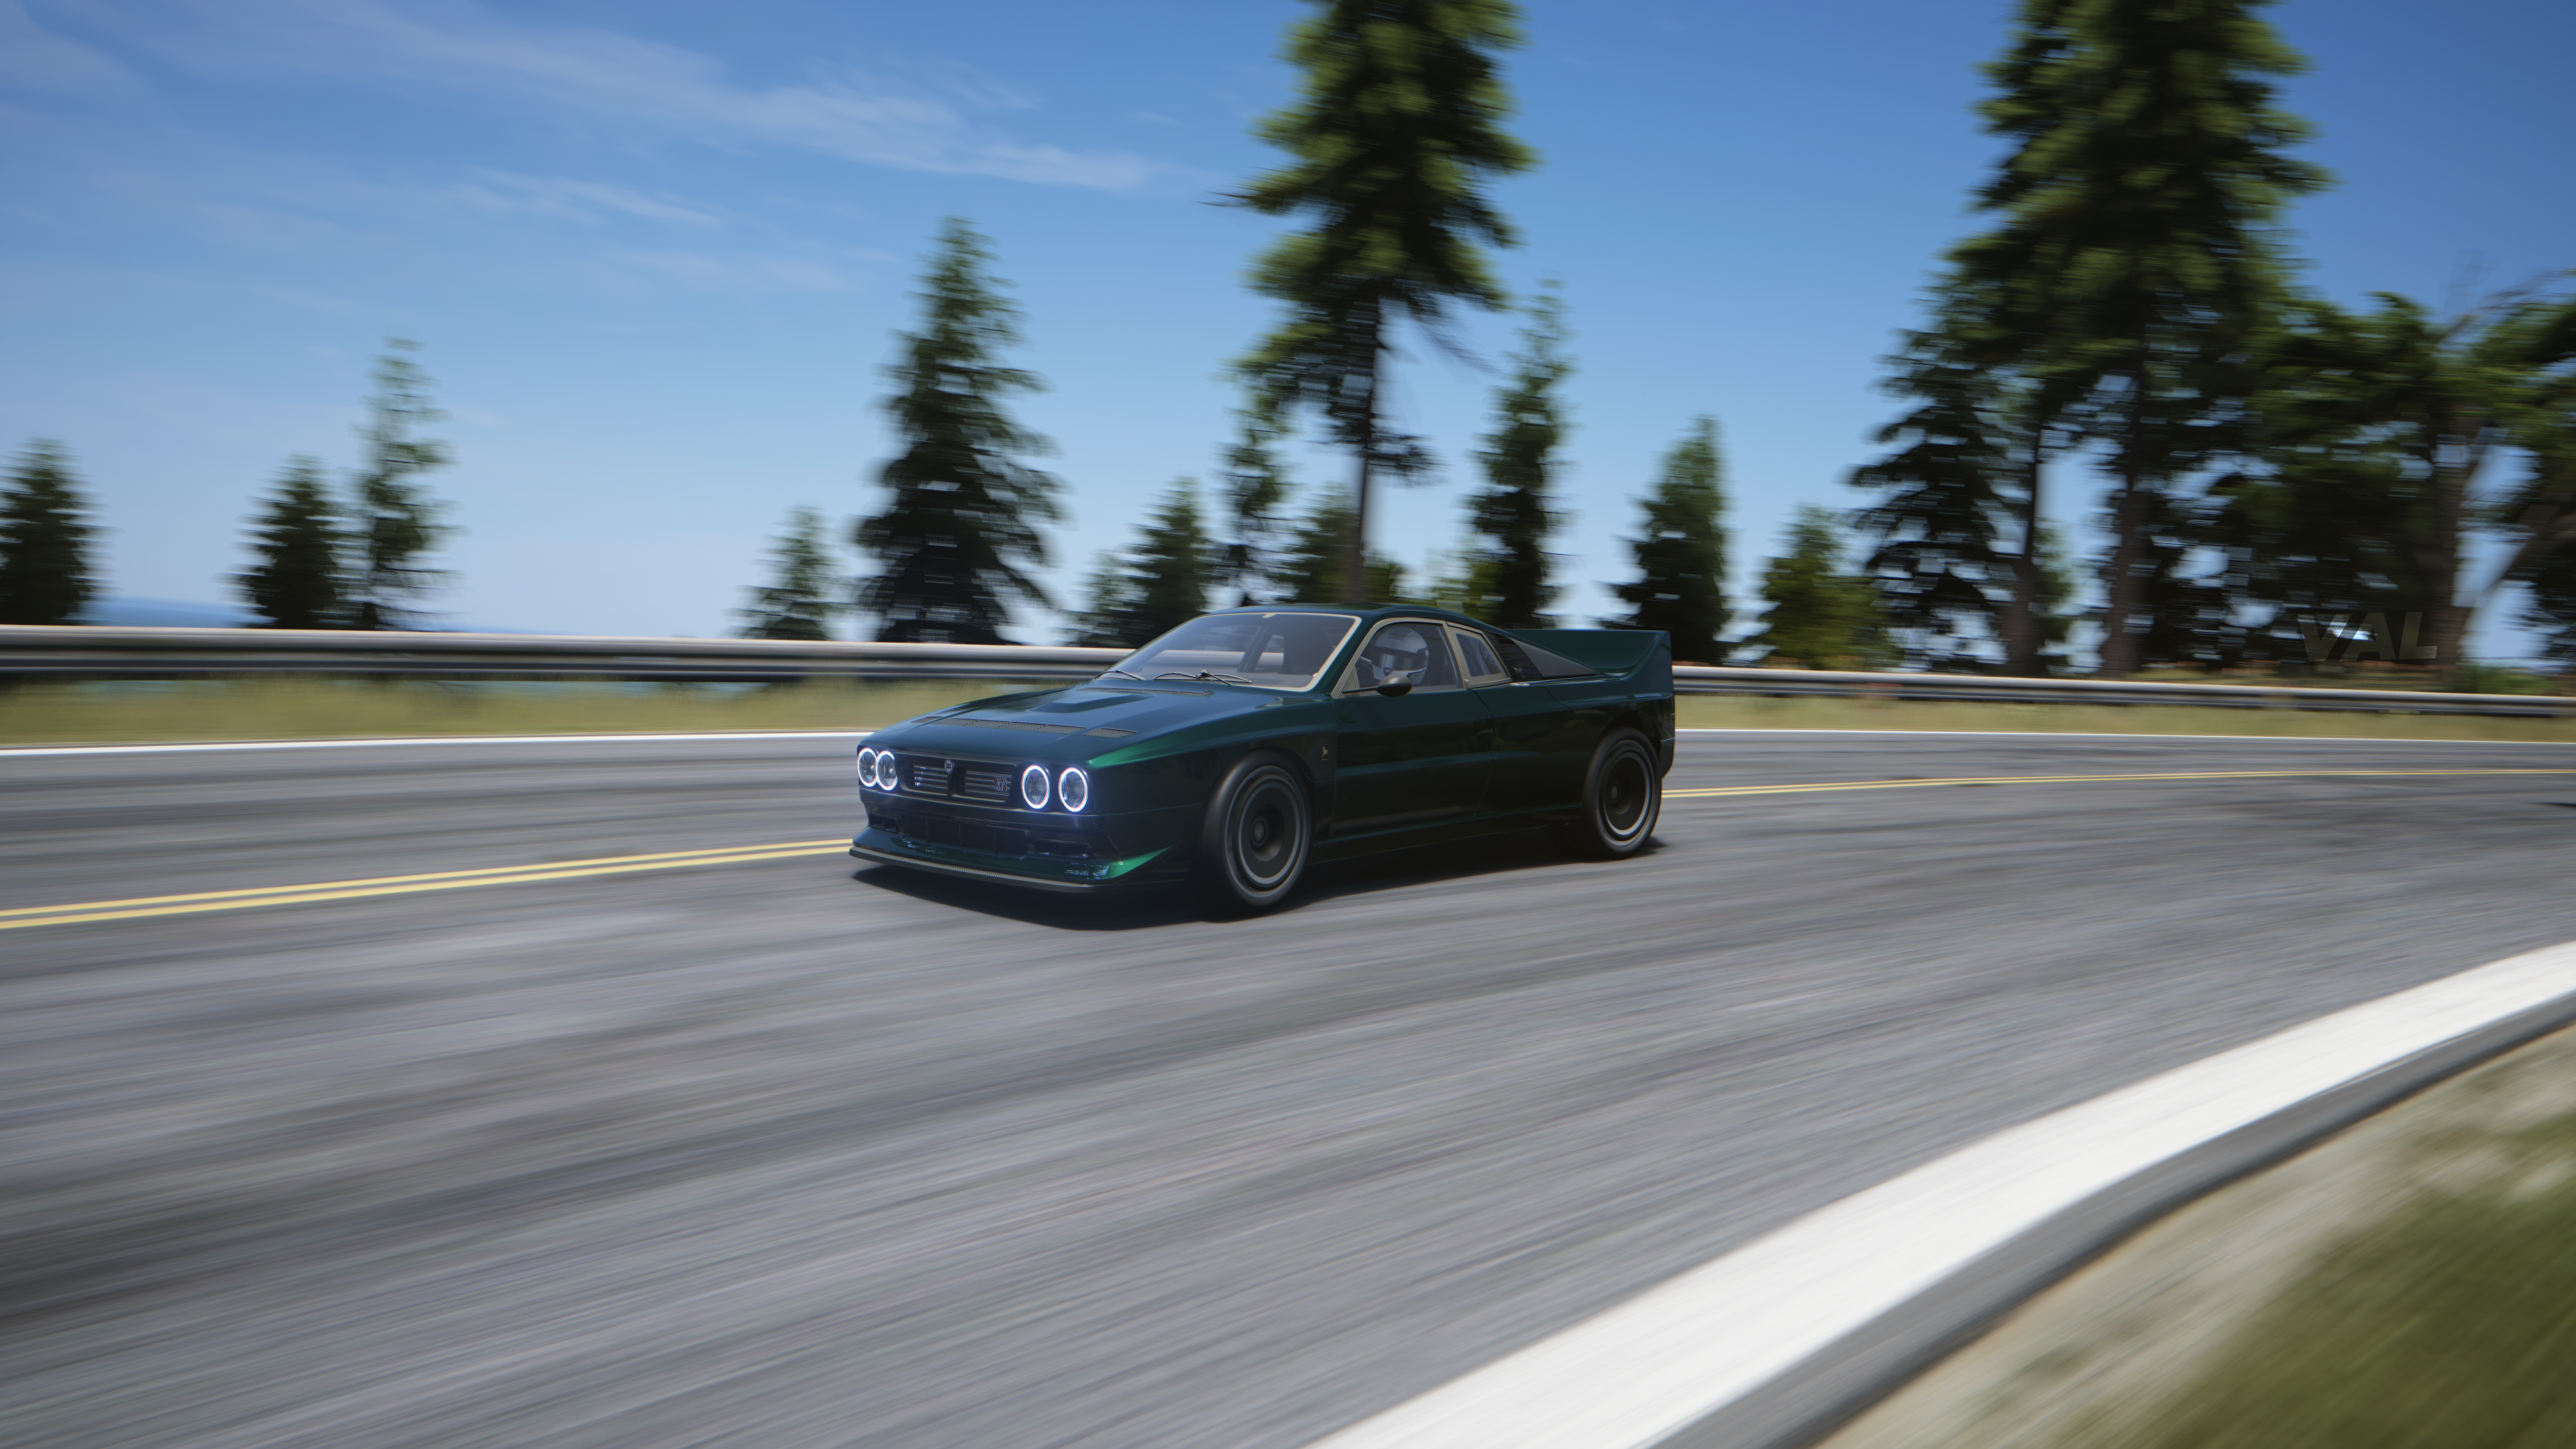 General 3840x2160 car video games Assetto Corsa Kimera Evo 37 road blurred blurry background trees CGI driving headlights clouds sky frontal view